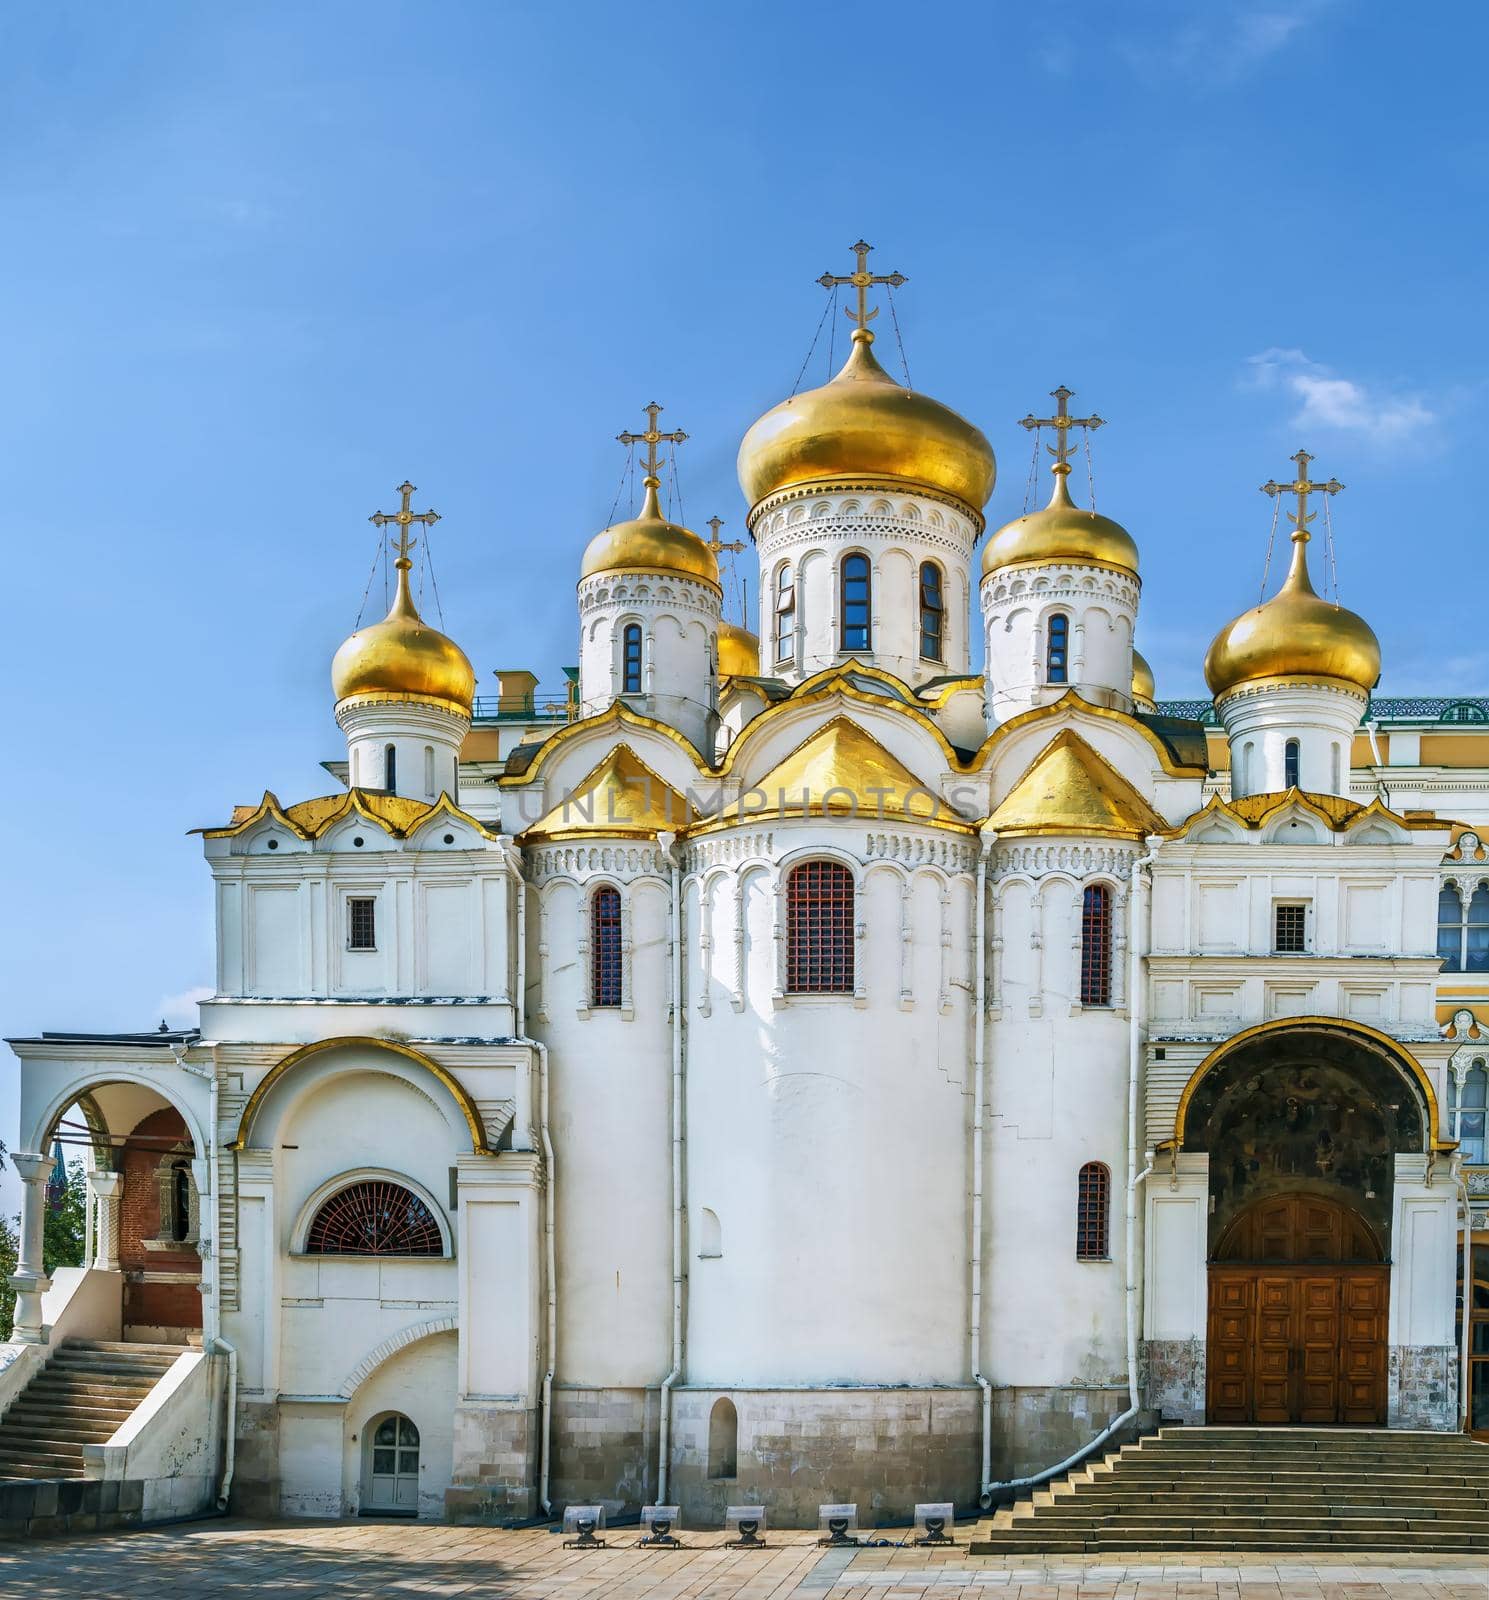  Cathedral of the Annunciation is a Russian Orthodox church. It is located on the southwest side of Cathedral Square of the Moscow Kremlin, Russia